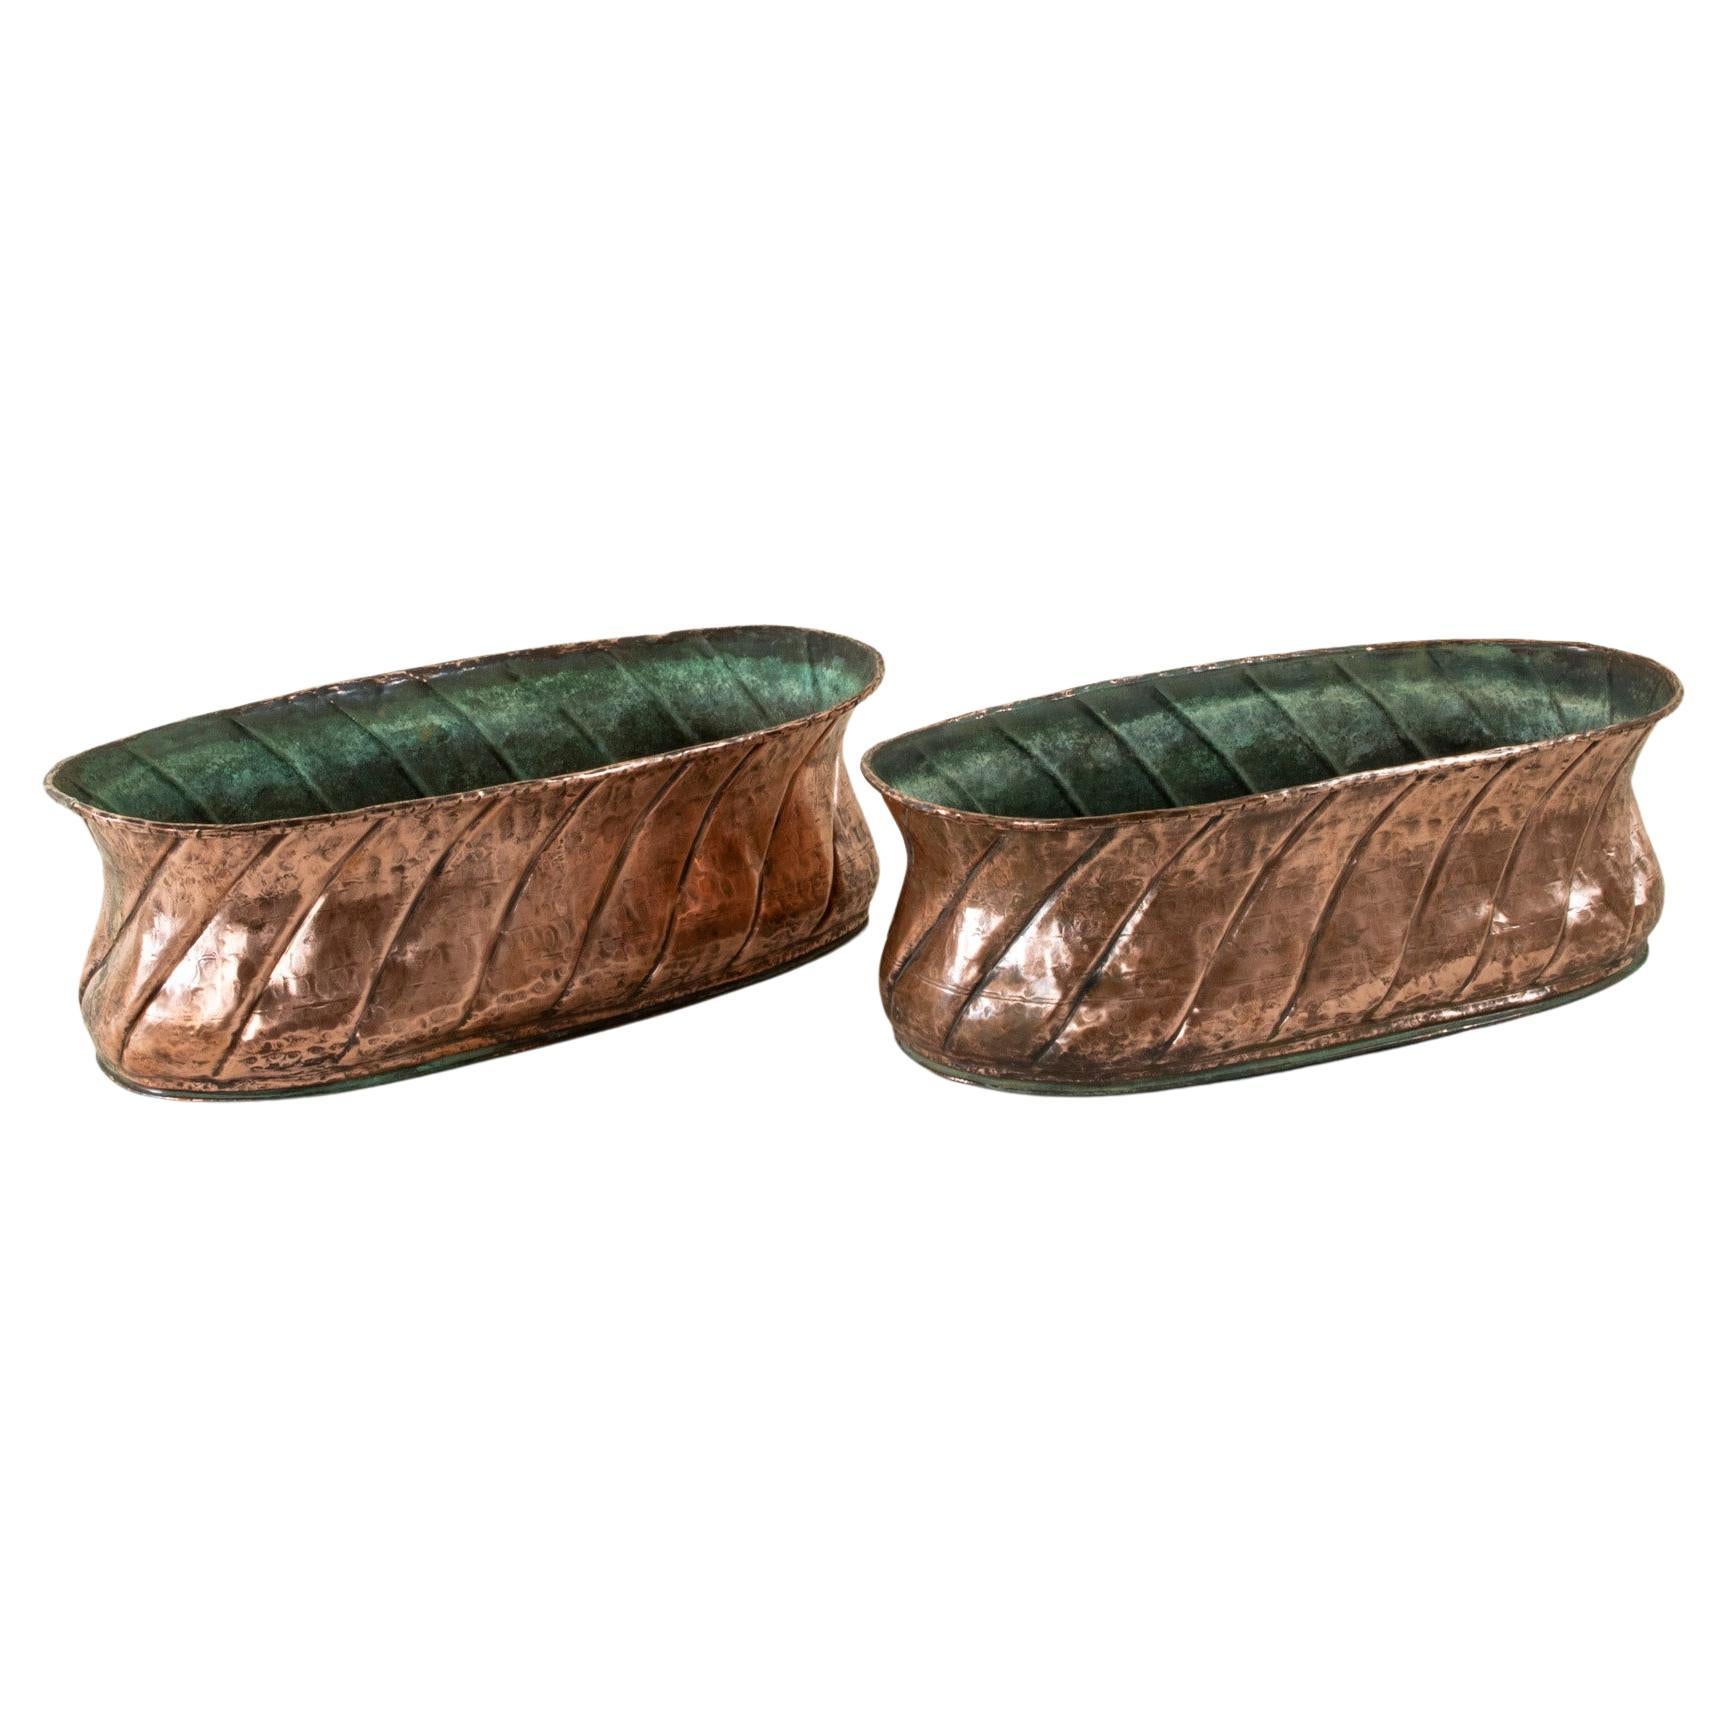 Pair of Late 19th Century French Hand-Hammered Copper Jardinières or Planters